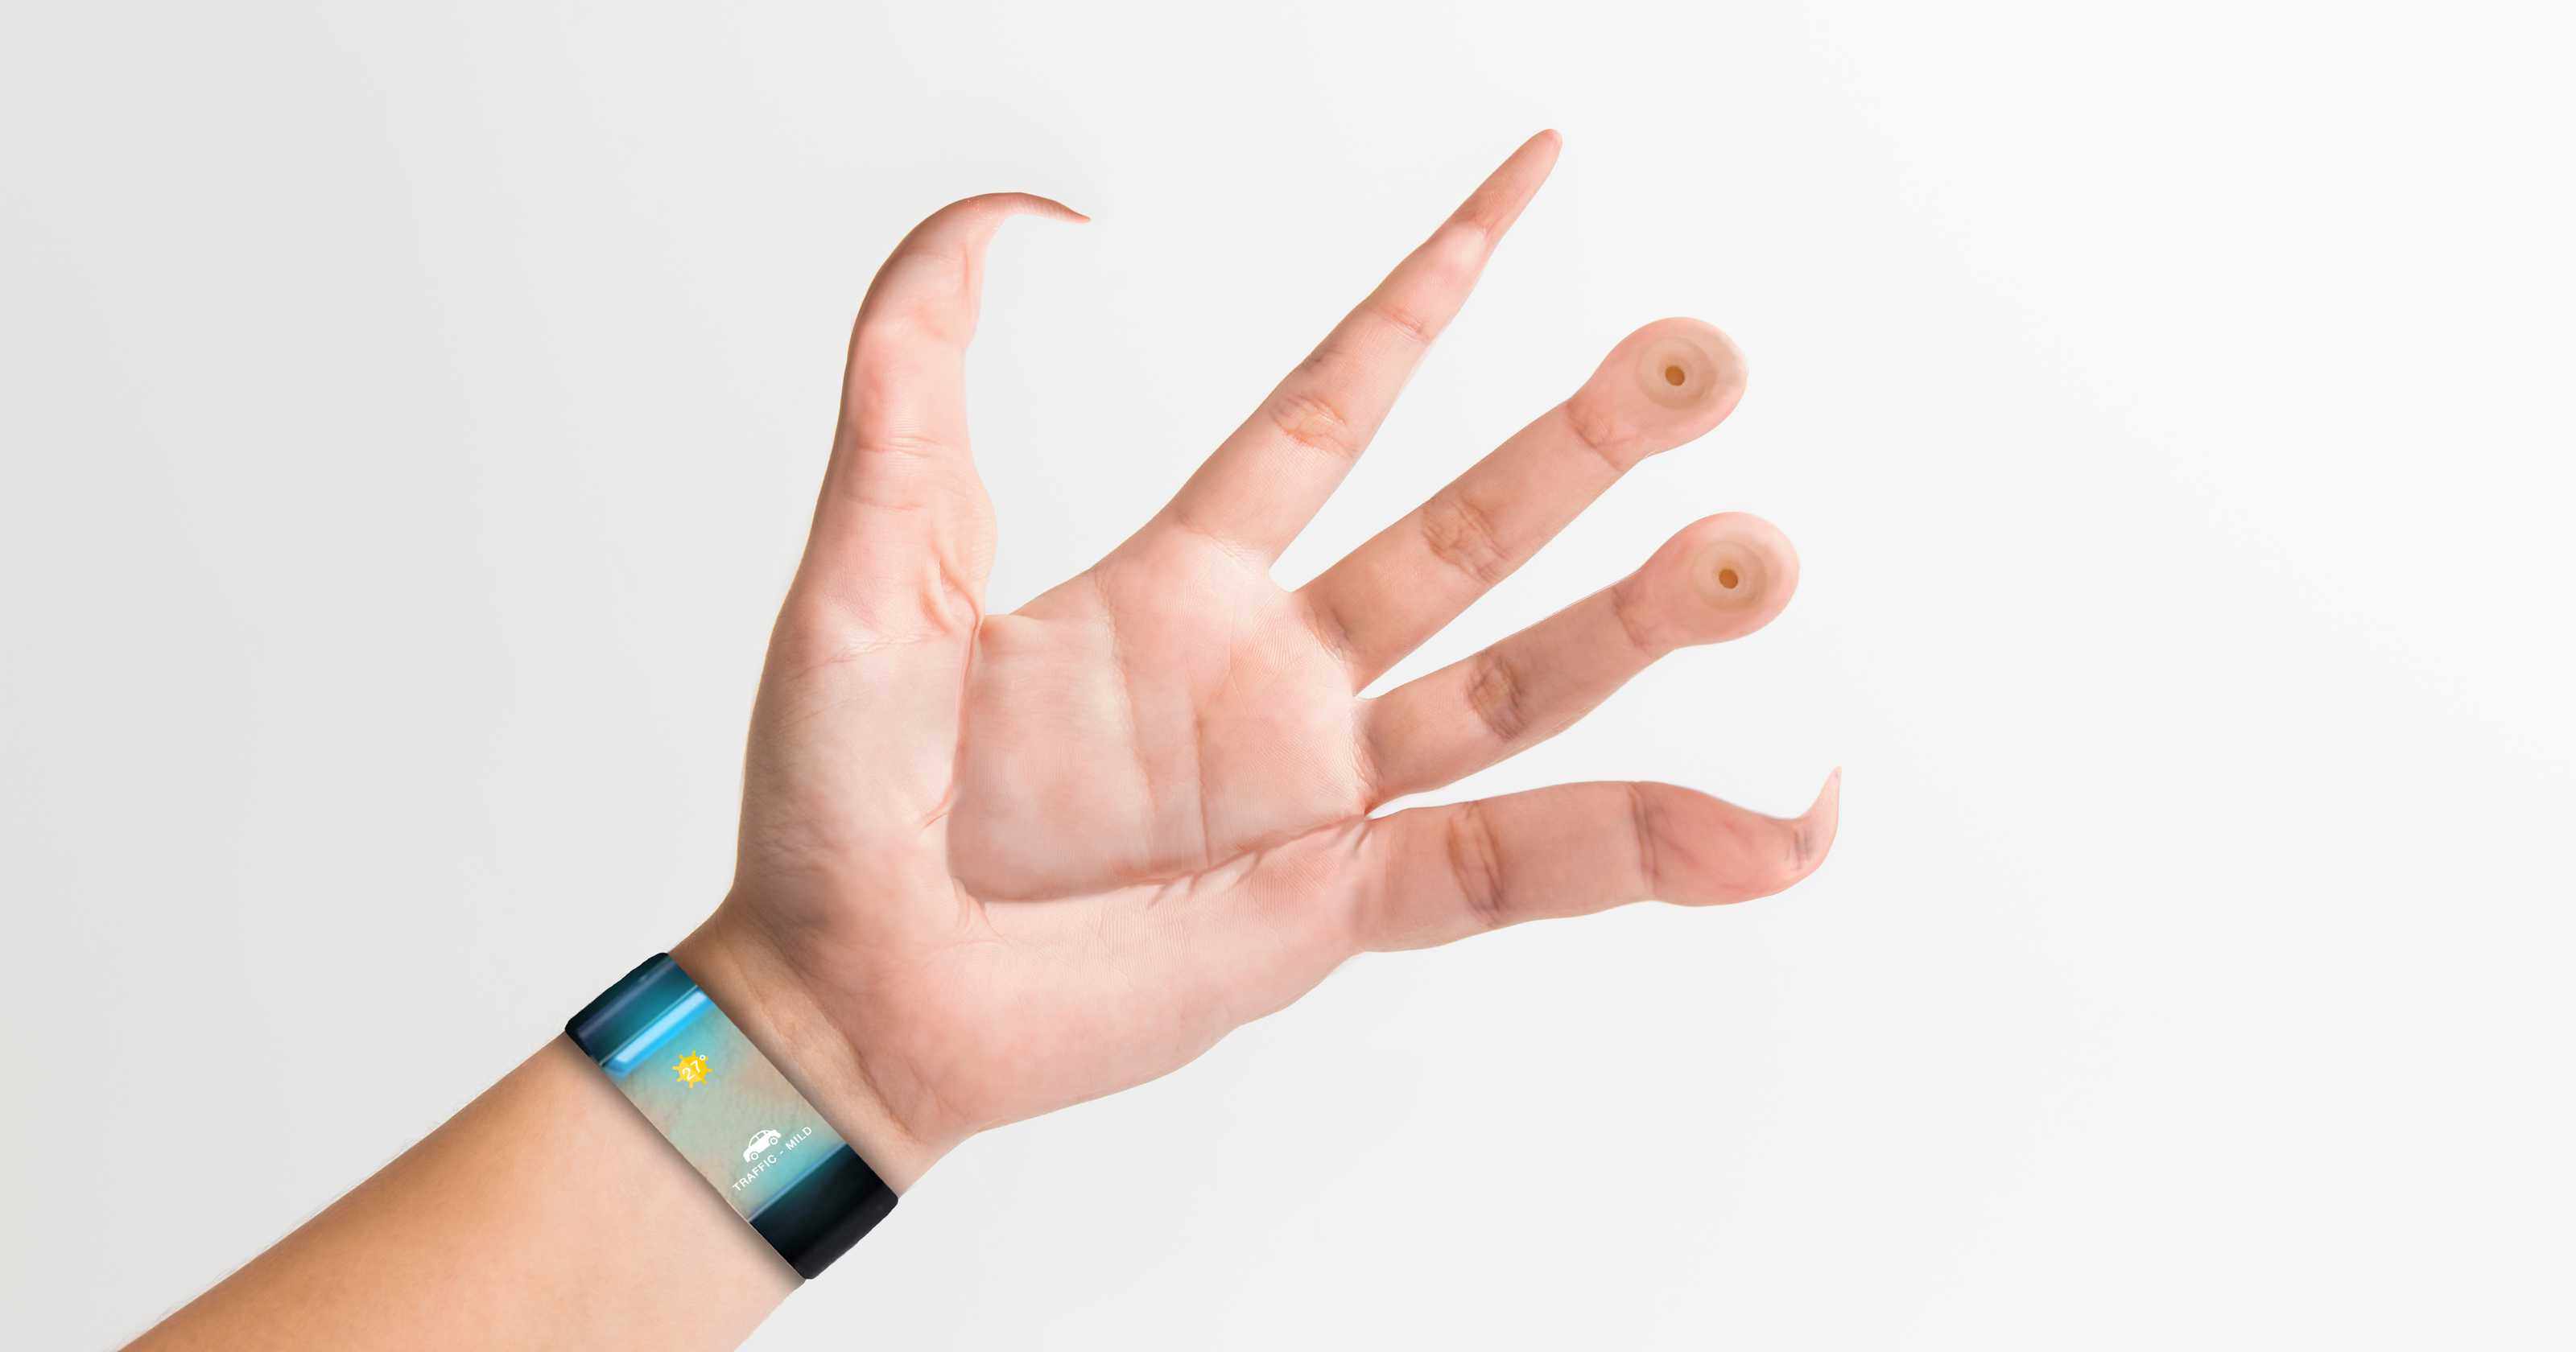 Here's what our hands might look like if they evolve for cellphone use